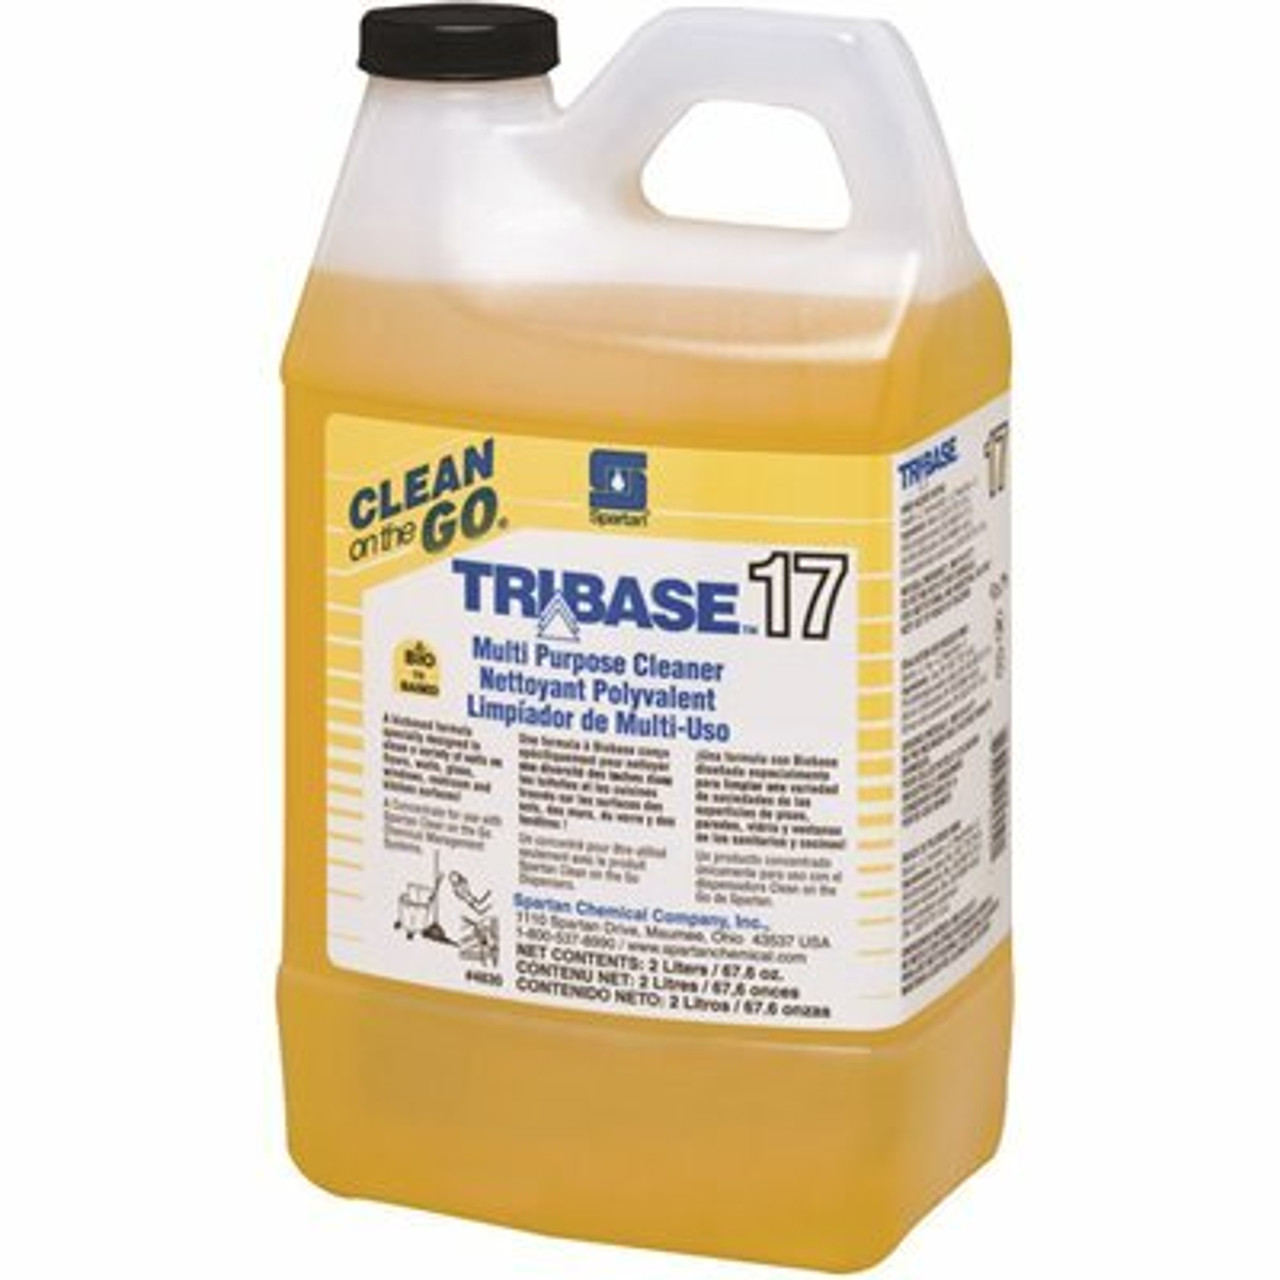 Spartan Chemical Company Tribase 2 Liter Multi Purpose Cleaner